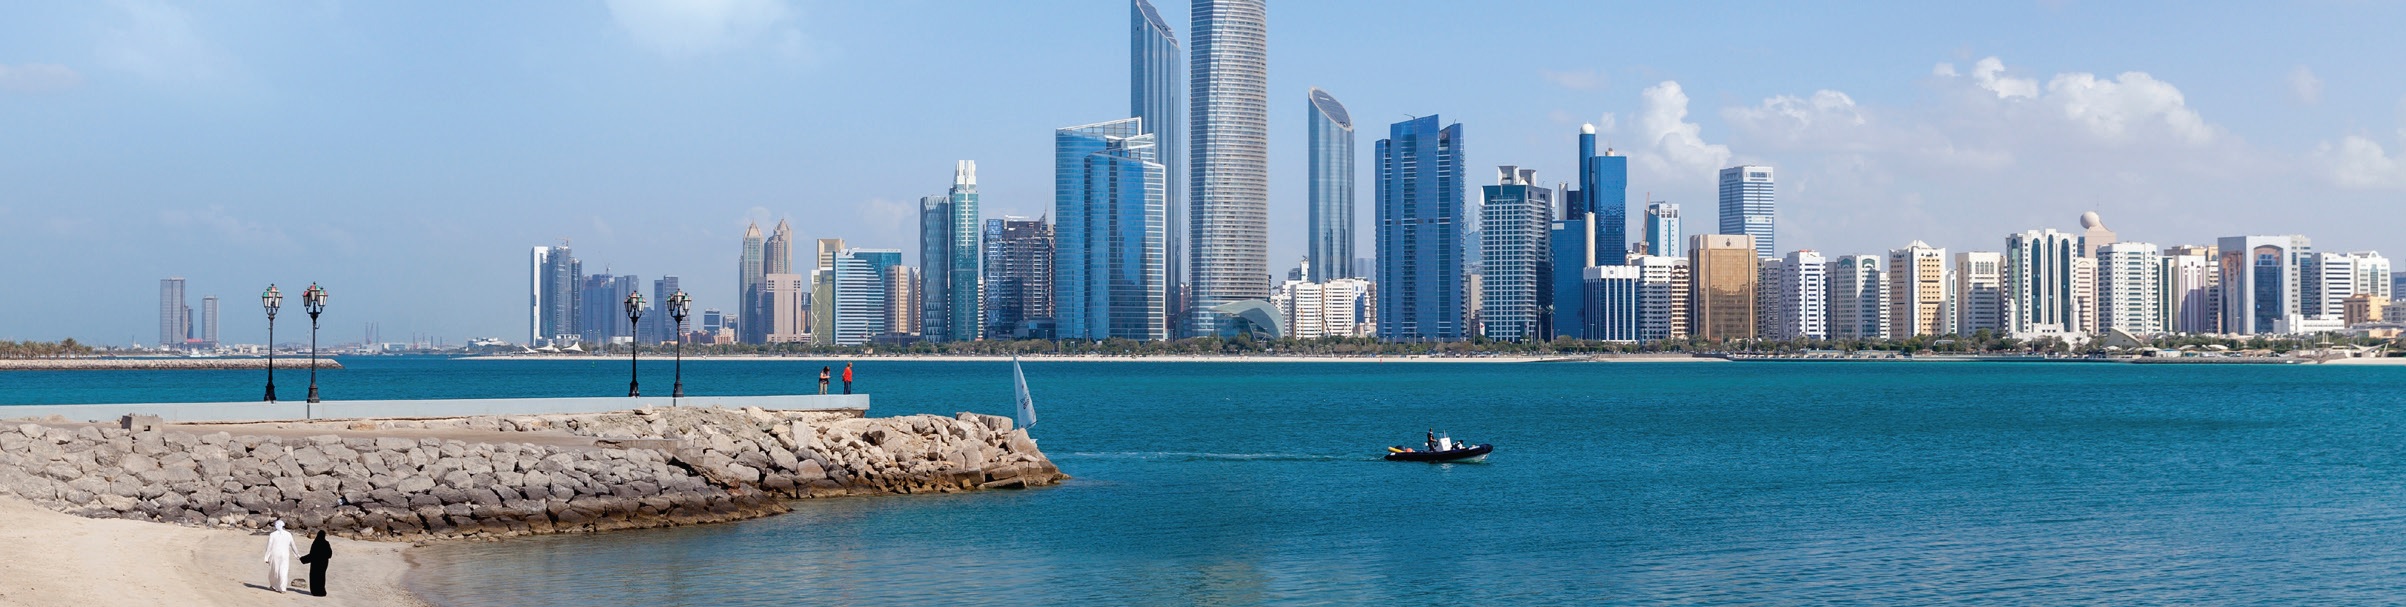 A scenic view of Abu Dhabi waterfont with the city in the background.